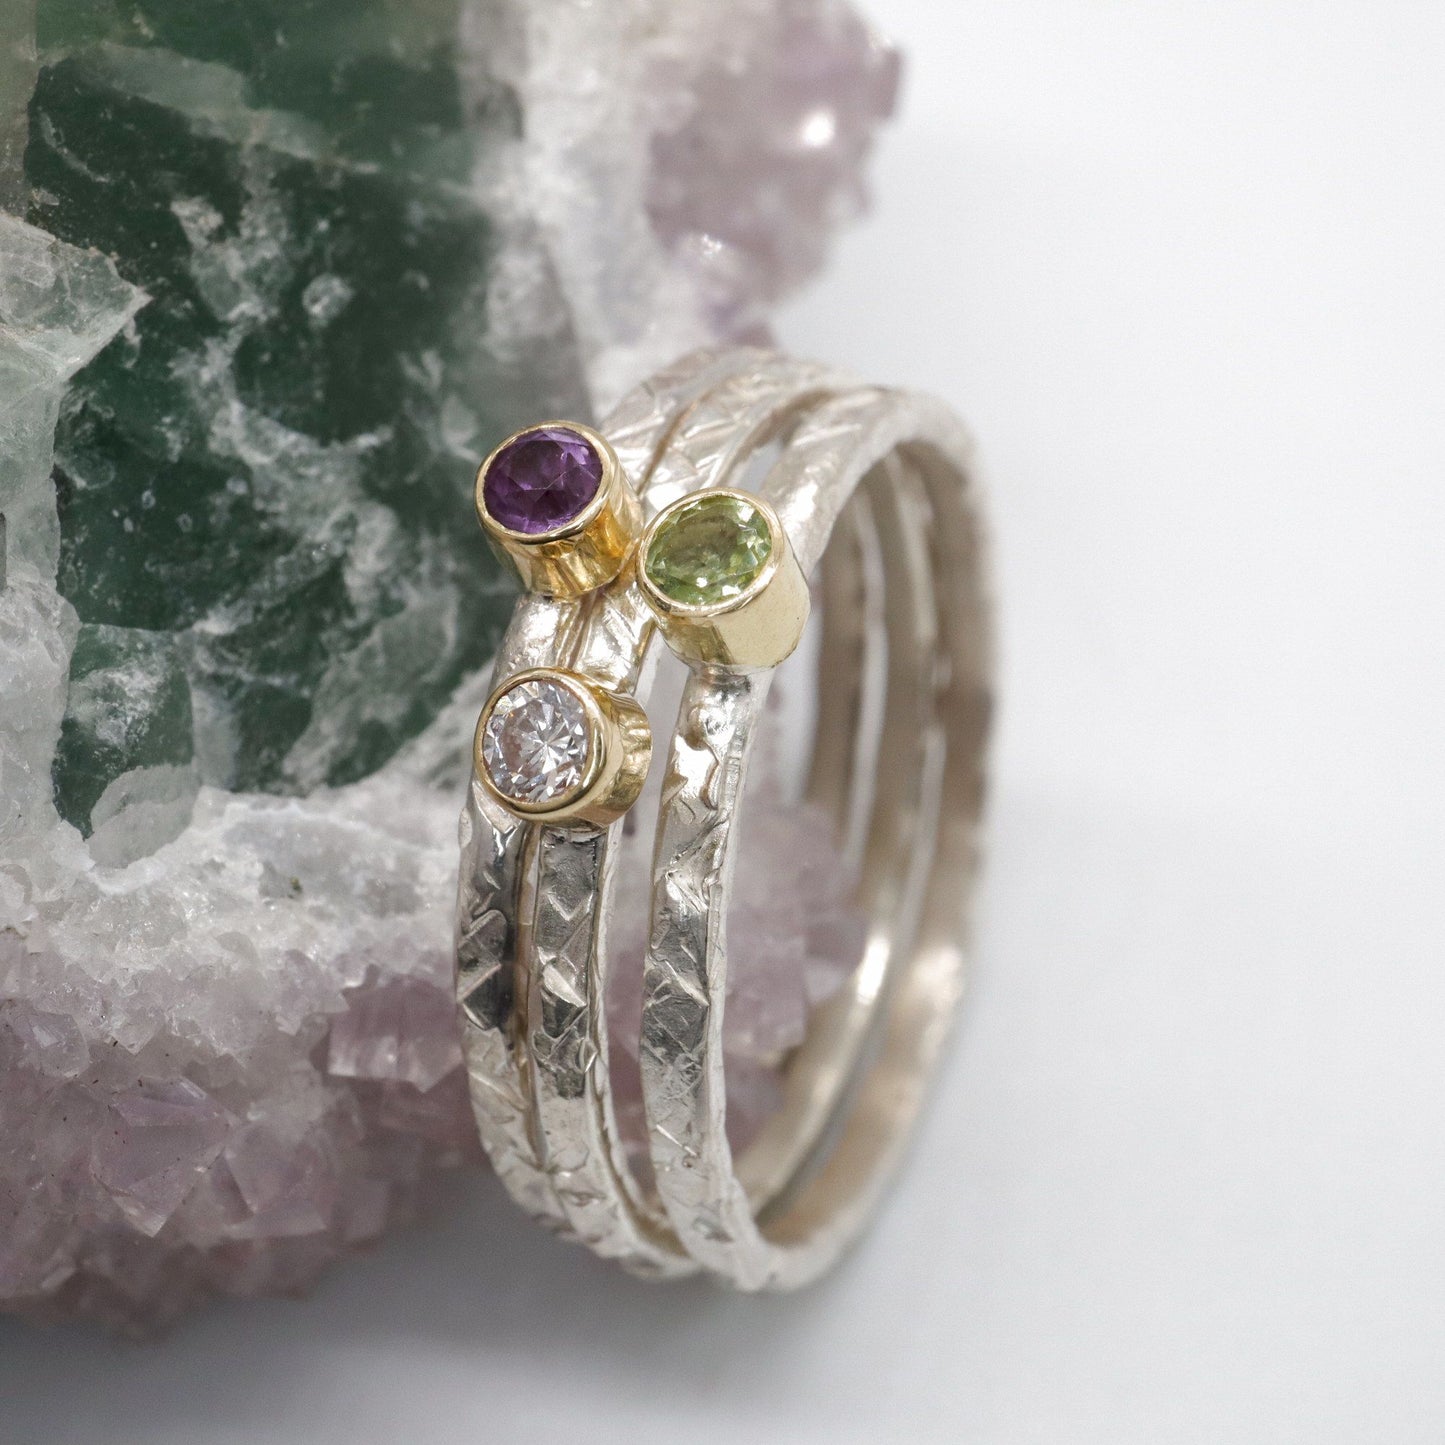 Stacking ring set of three with amethyst, diamond and peridot, Striding Edge design in 18ct yellow gold and silver.